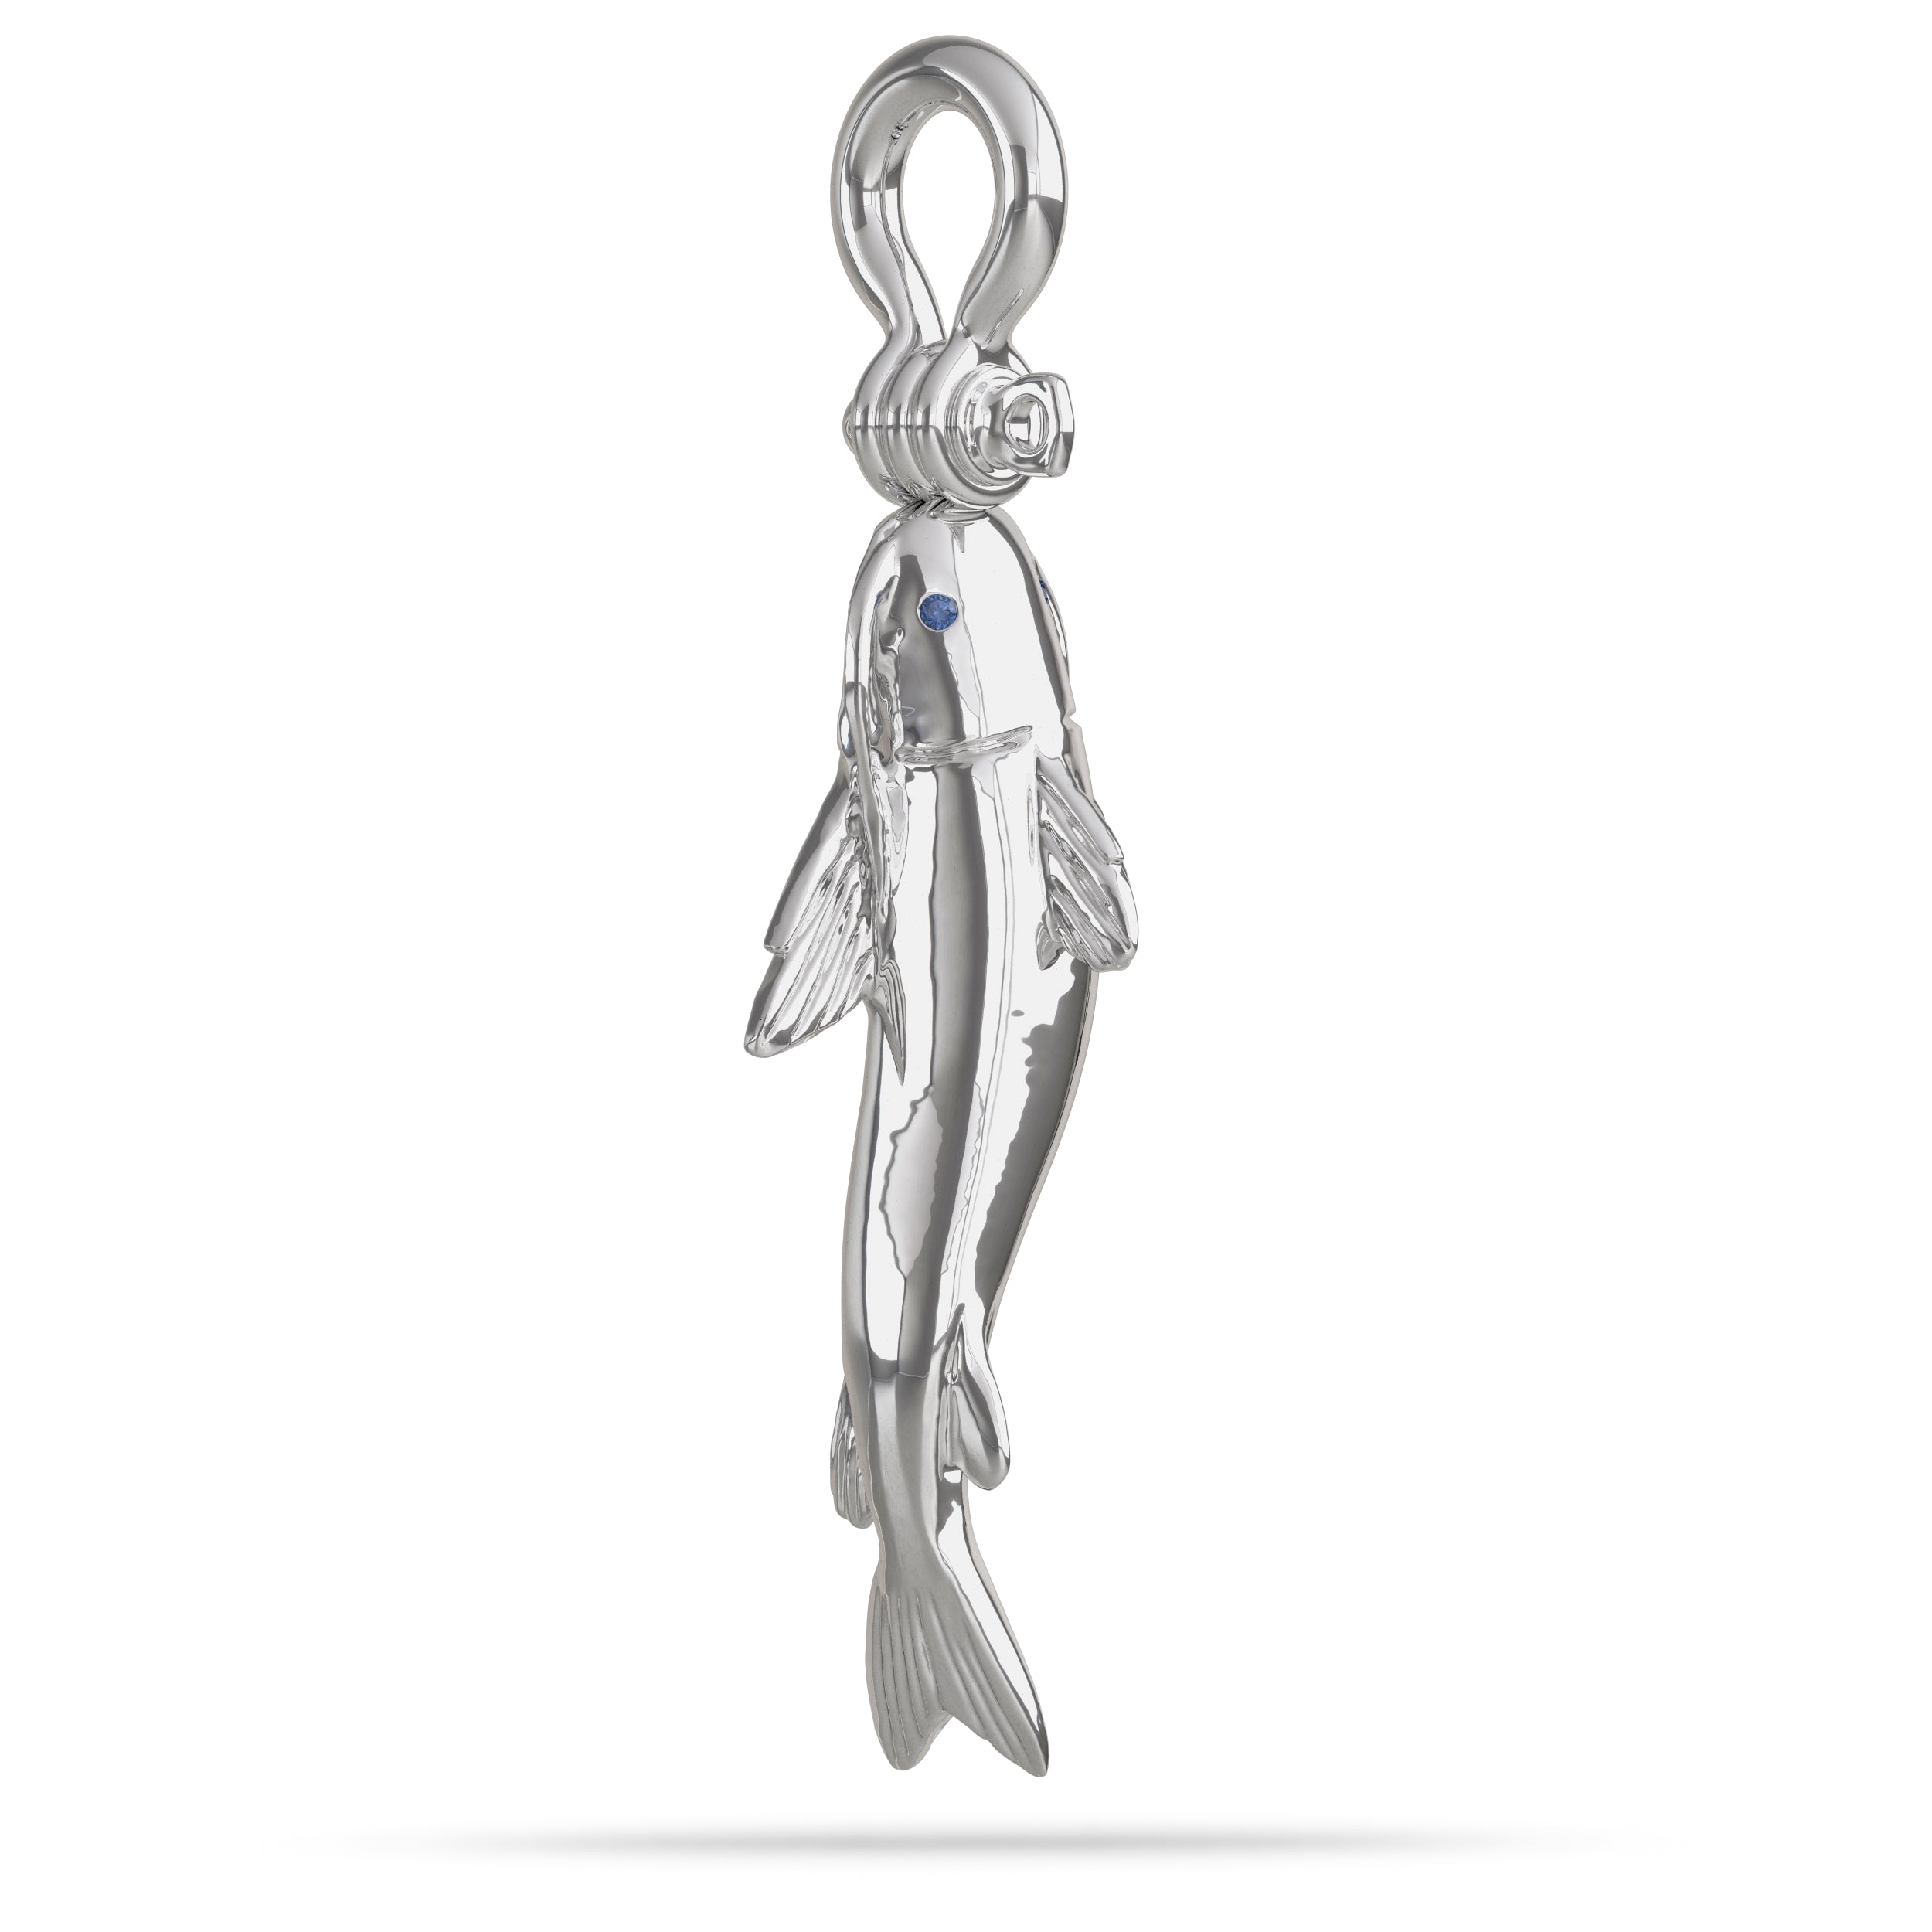 Sterling Silver Catfish  Pendant High Polished Mirror Finish With Blue Sapphire Eye with A Mariner Shackle Bail Custom Designed By Nautical Treasure Jewelry In The Florida Keys Noodling Hanna